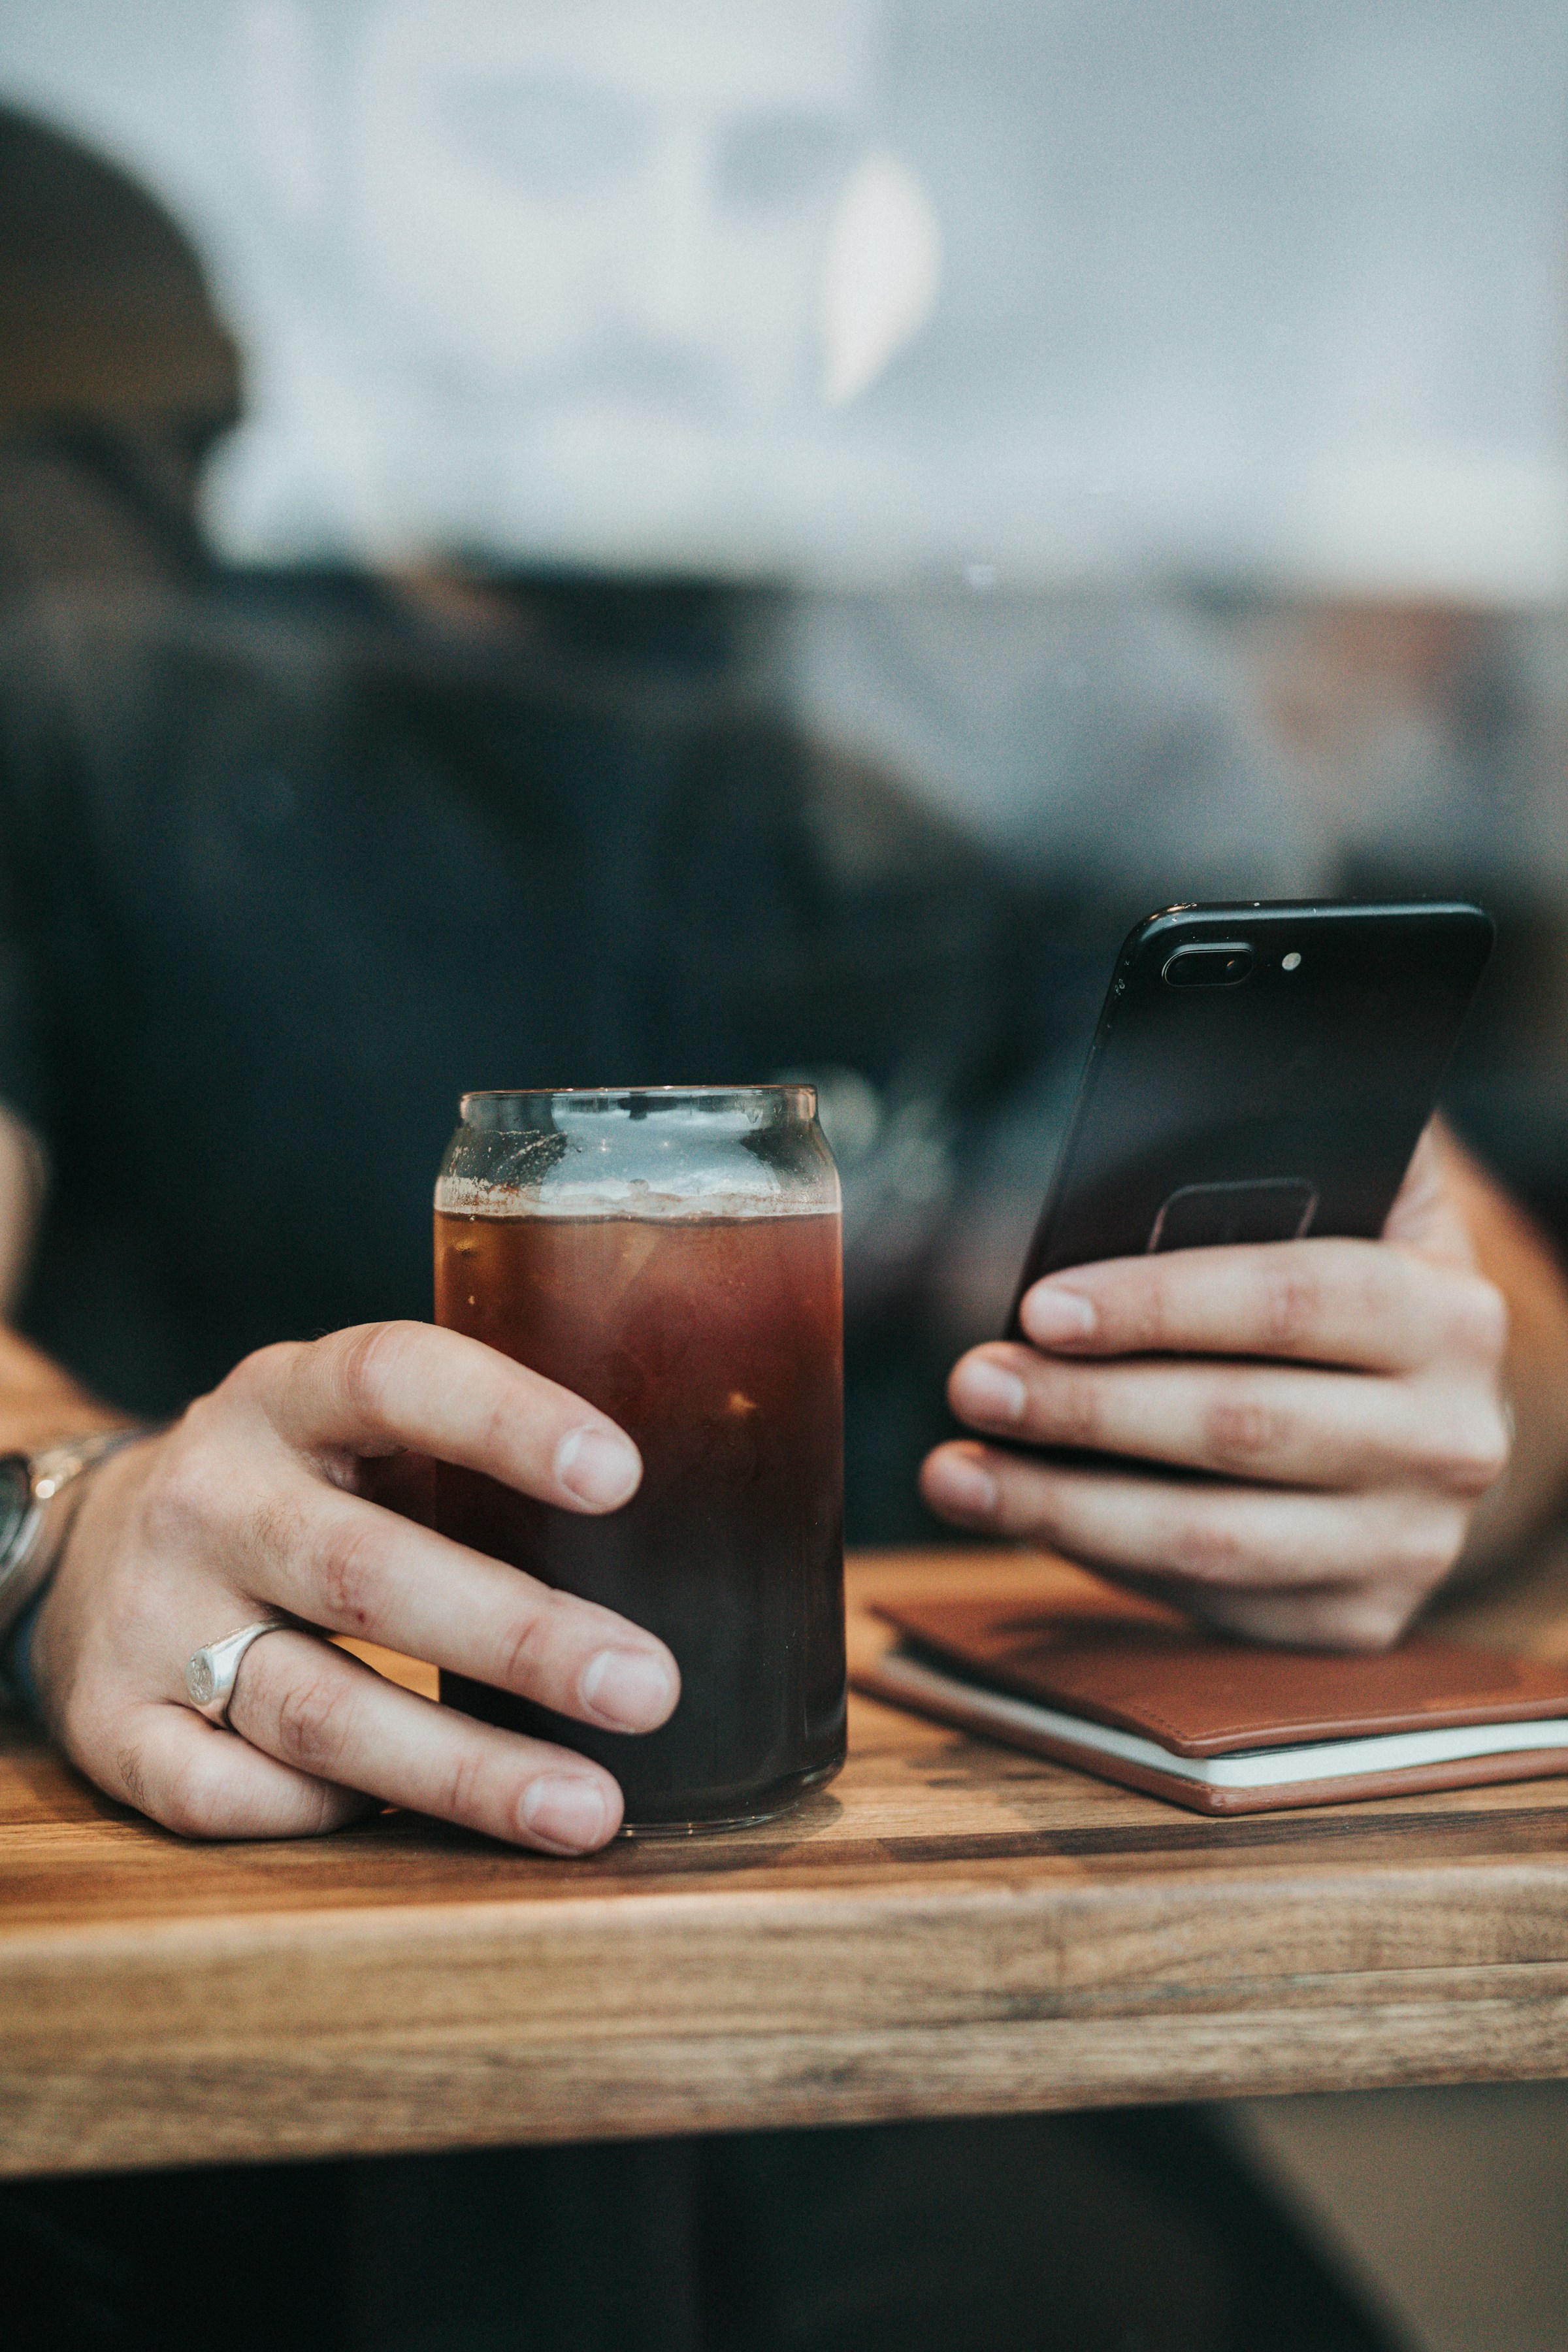 A man using his phone while holding a glass of drink | Source: Unsplash